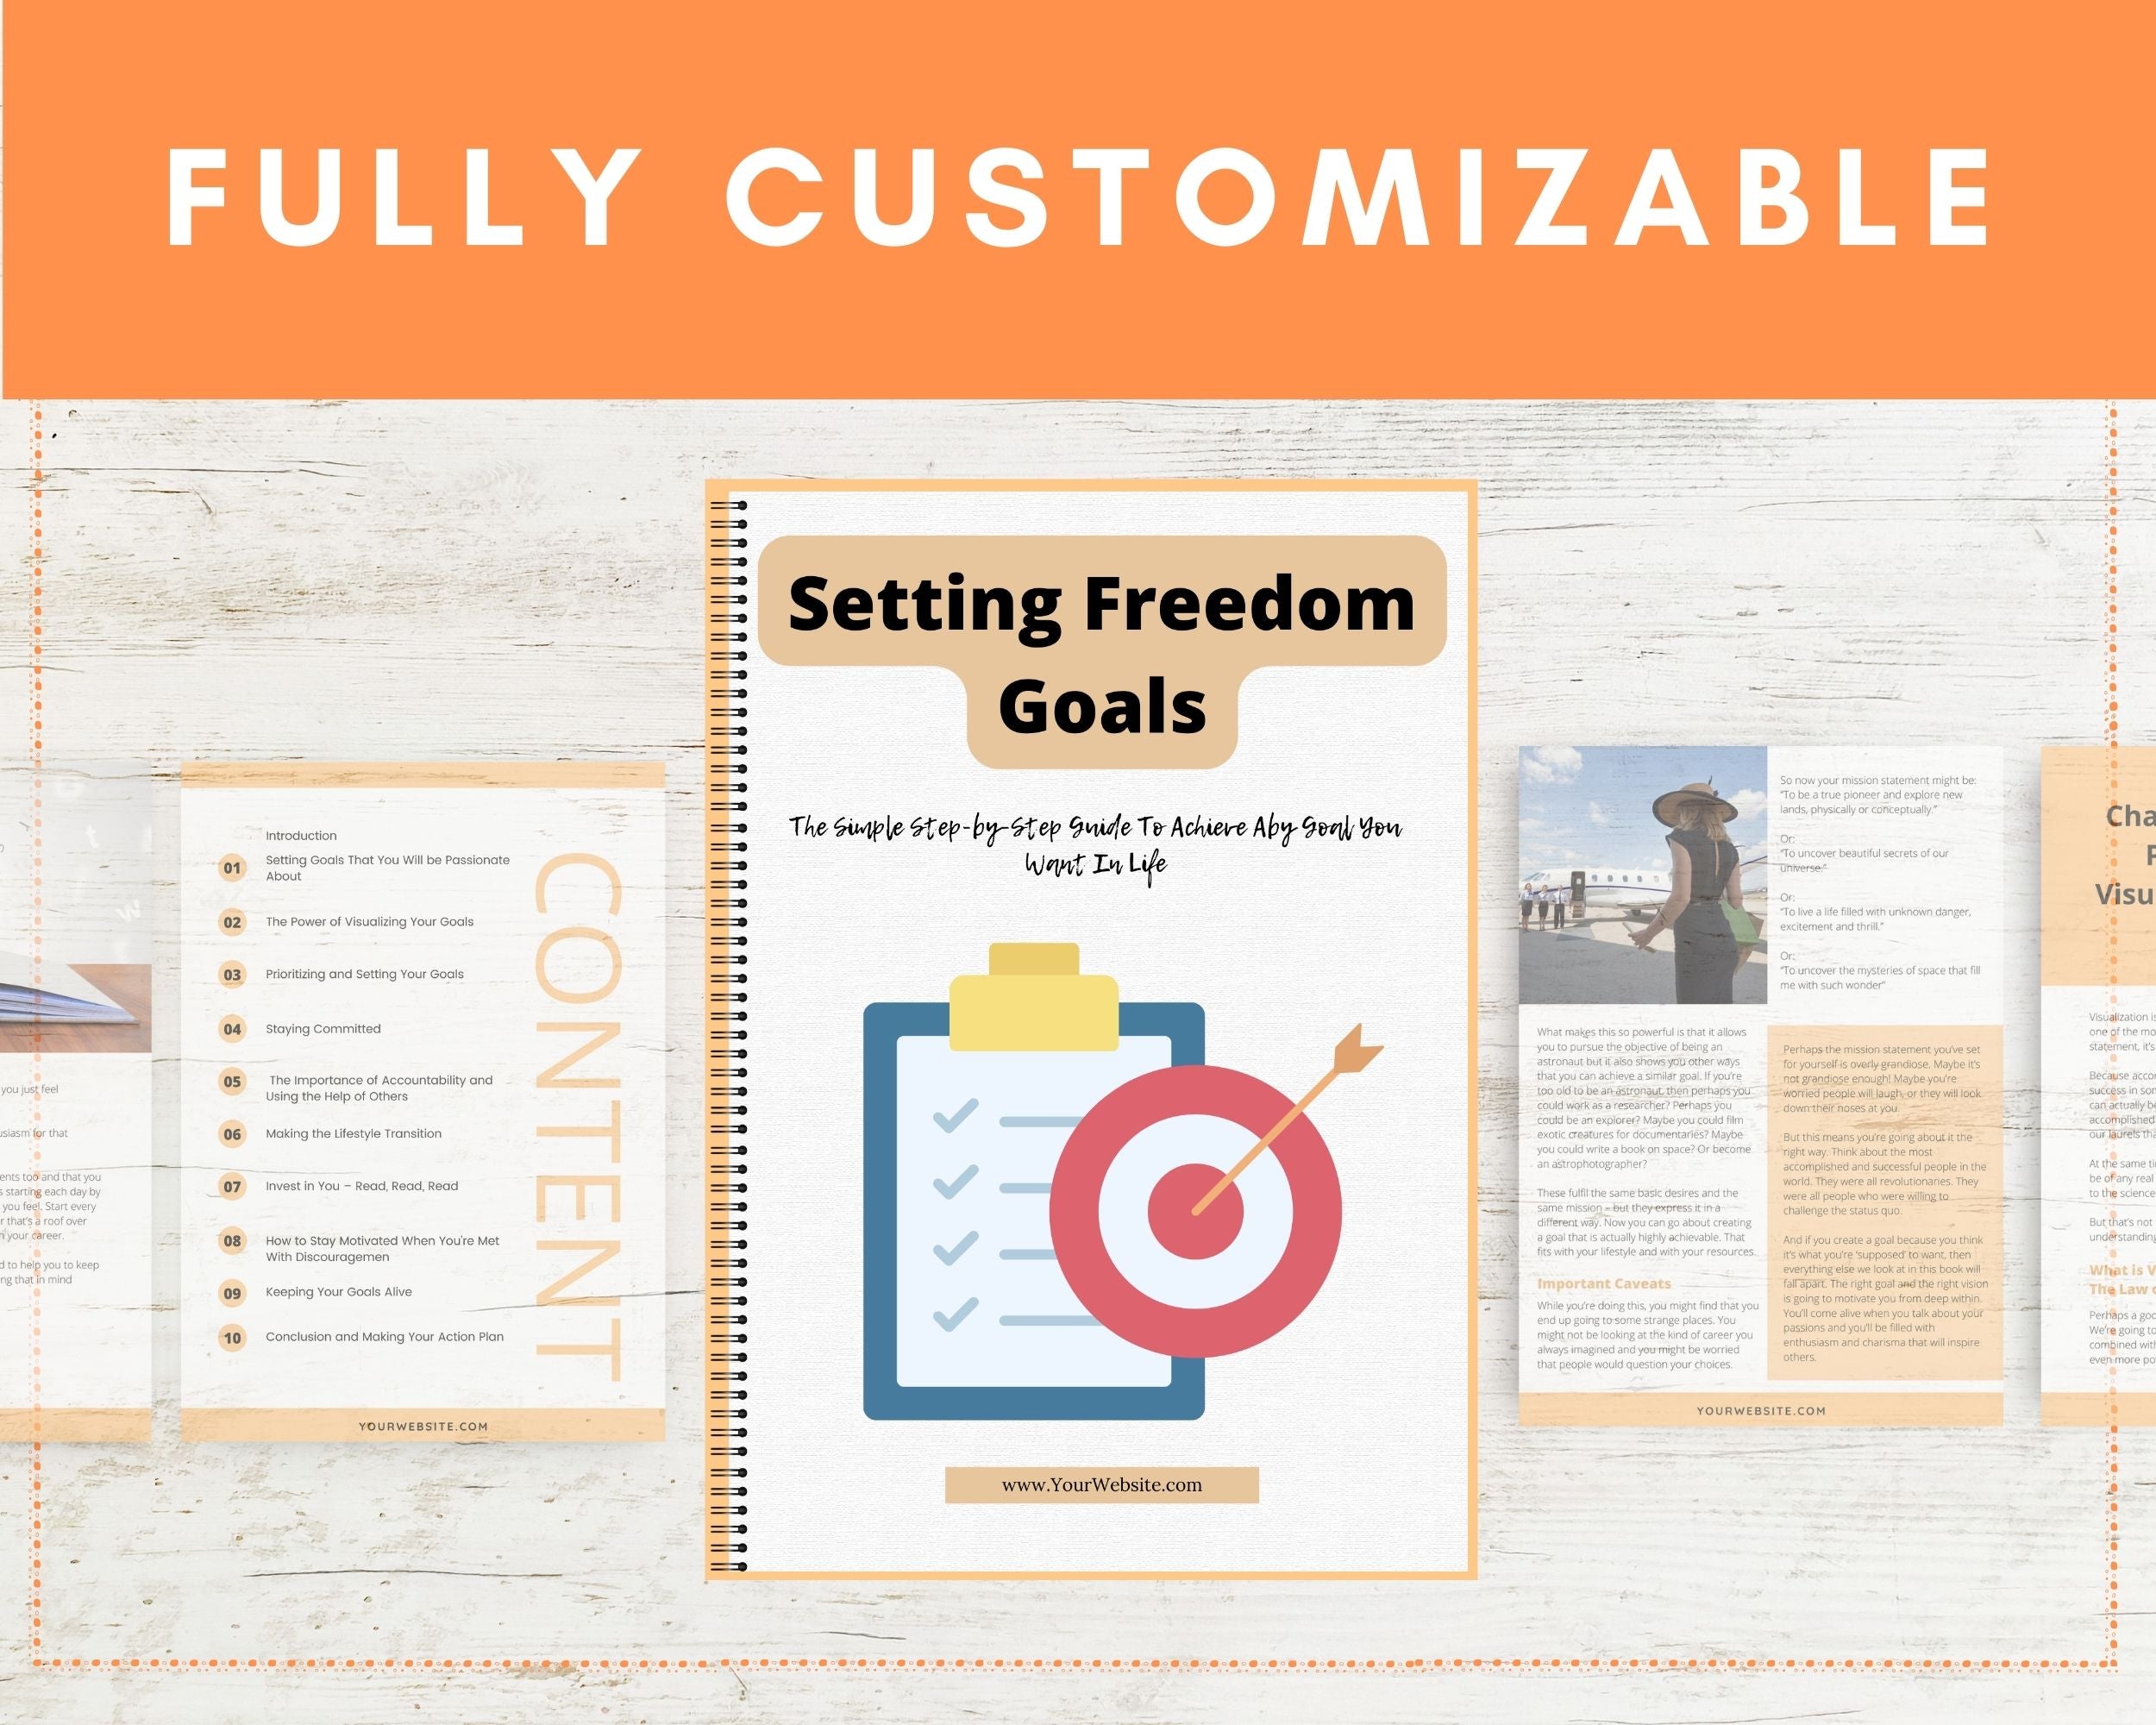 Editable Setting Freedom Goals Ebook | Done-for-You Ebook in Canva | Rebrandable and Resizable Canva Template